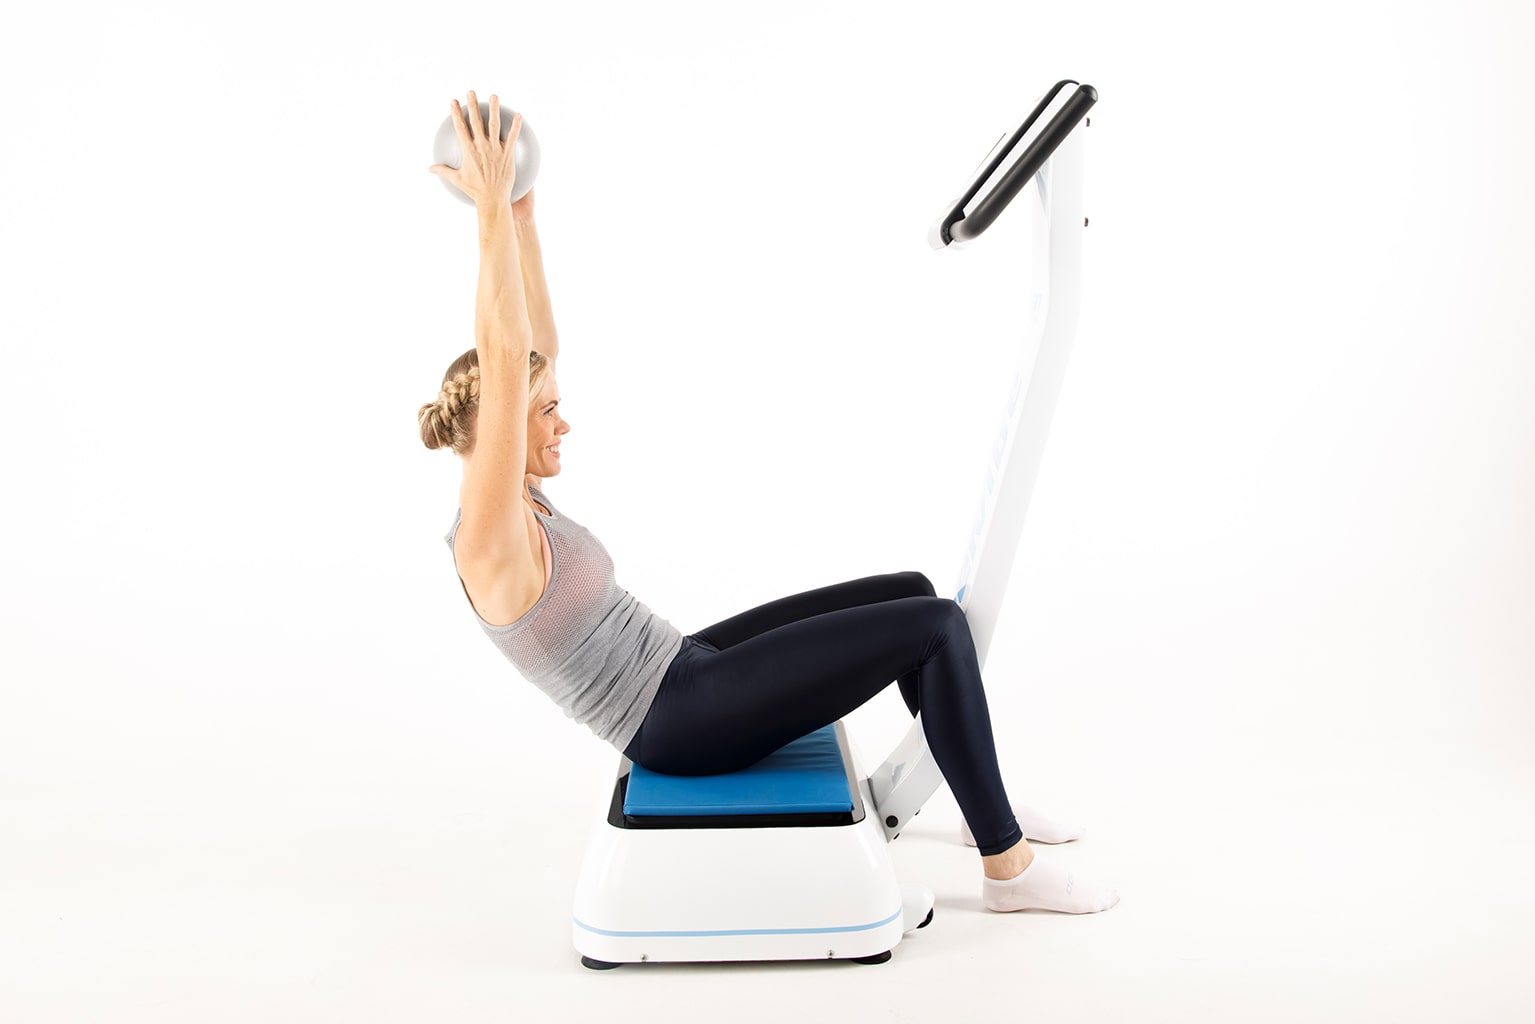 What Is a Vibration Plate and What Do You Use It For?